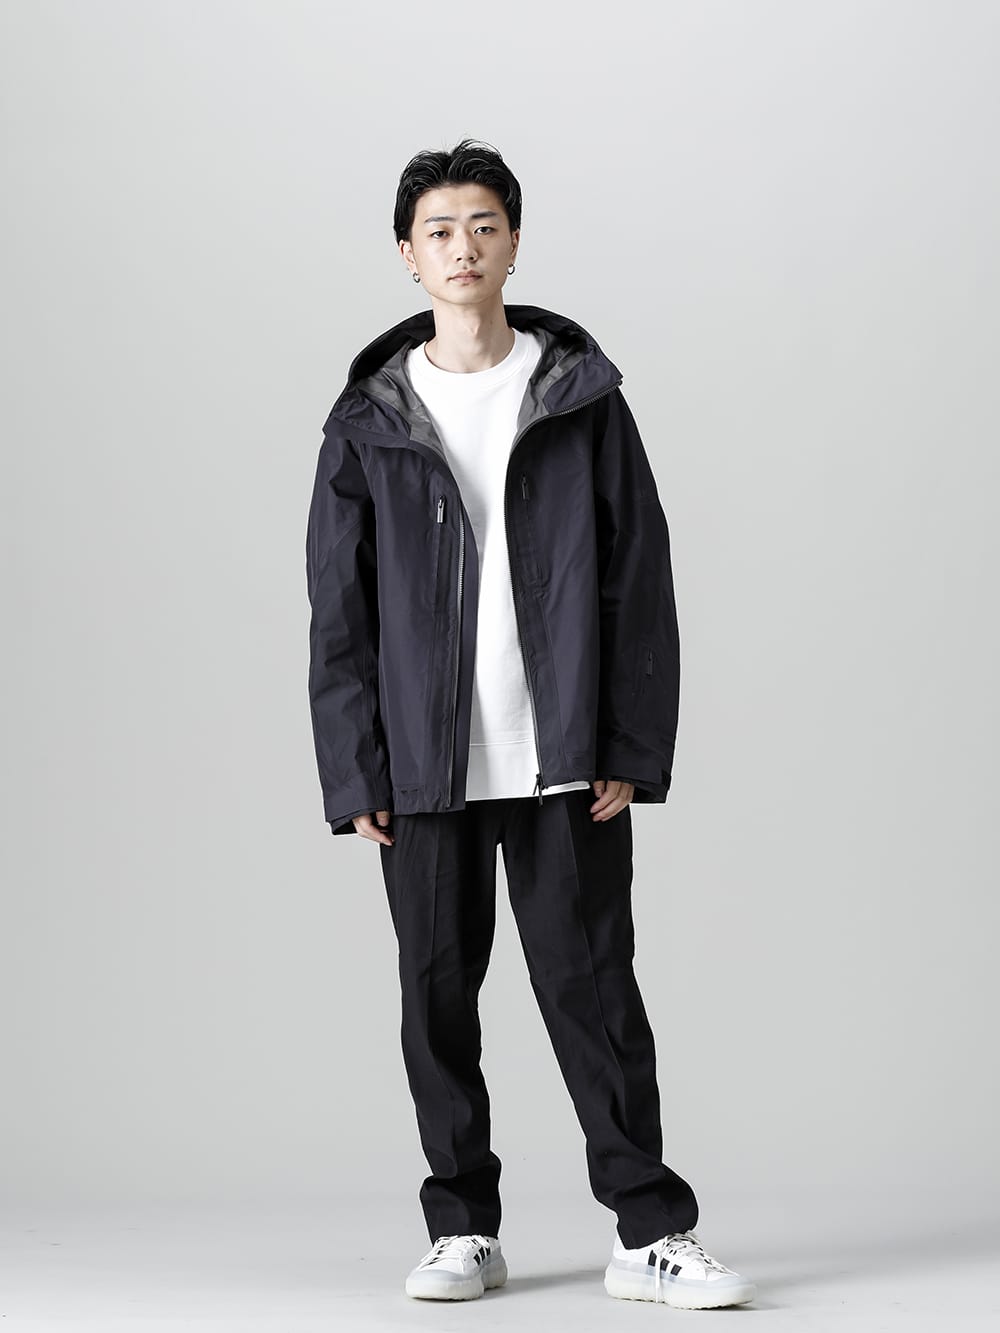 Arrival Information] New 2022 SS from White Mountaineering is now 